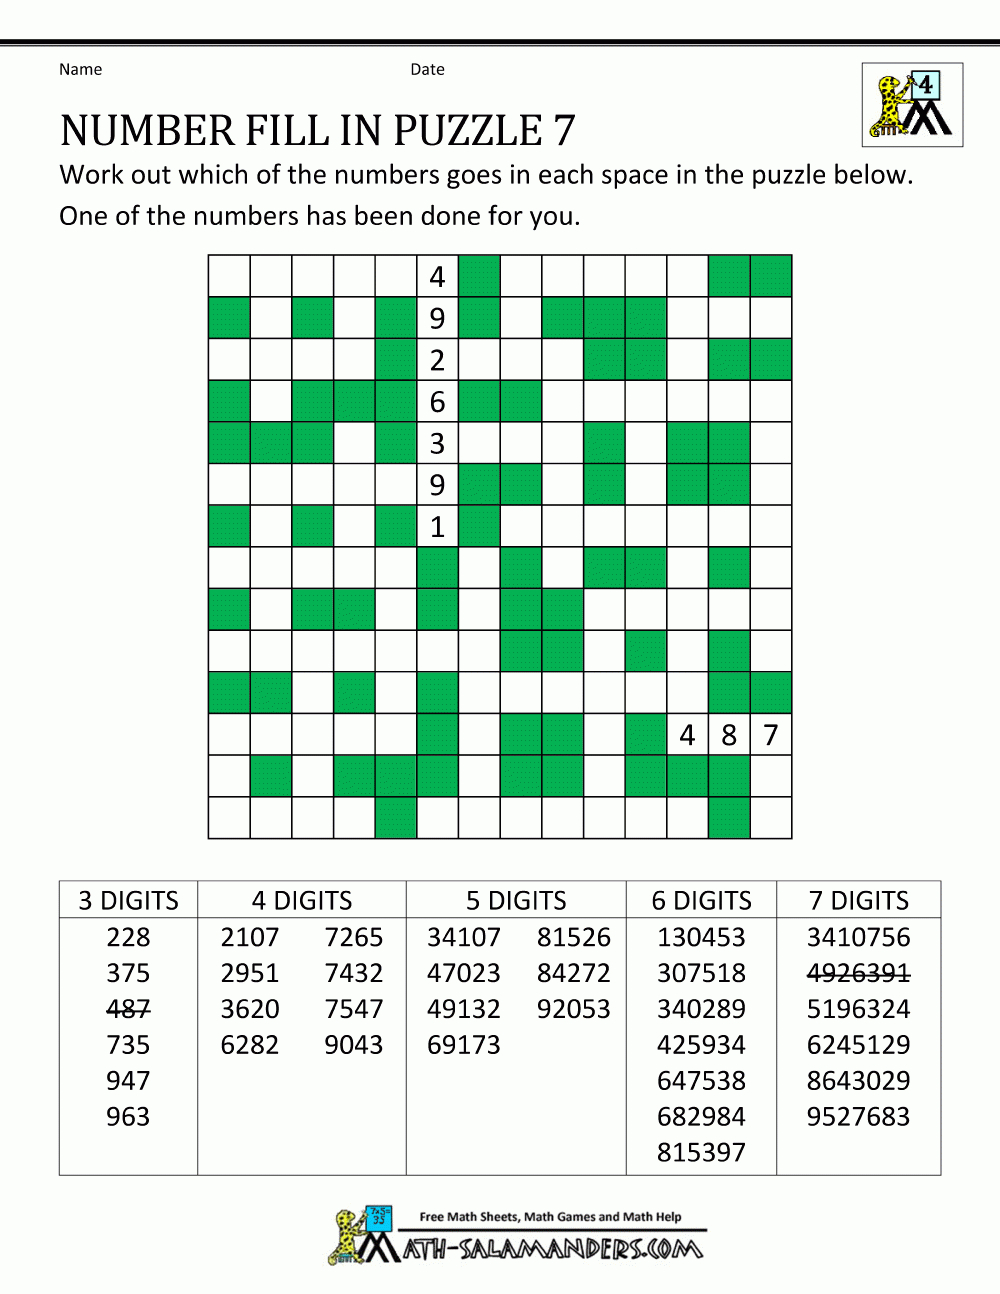 Number Fill In Puzzles - Free Printable Crossword Puzzle #7